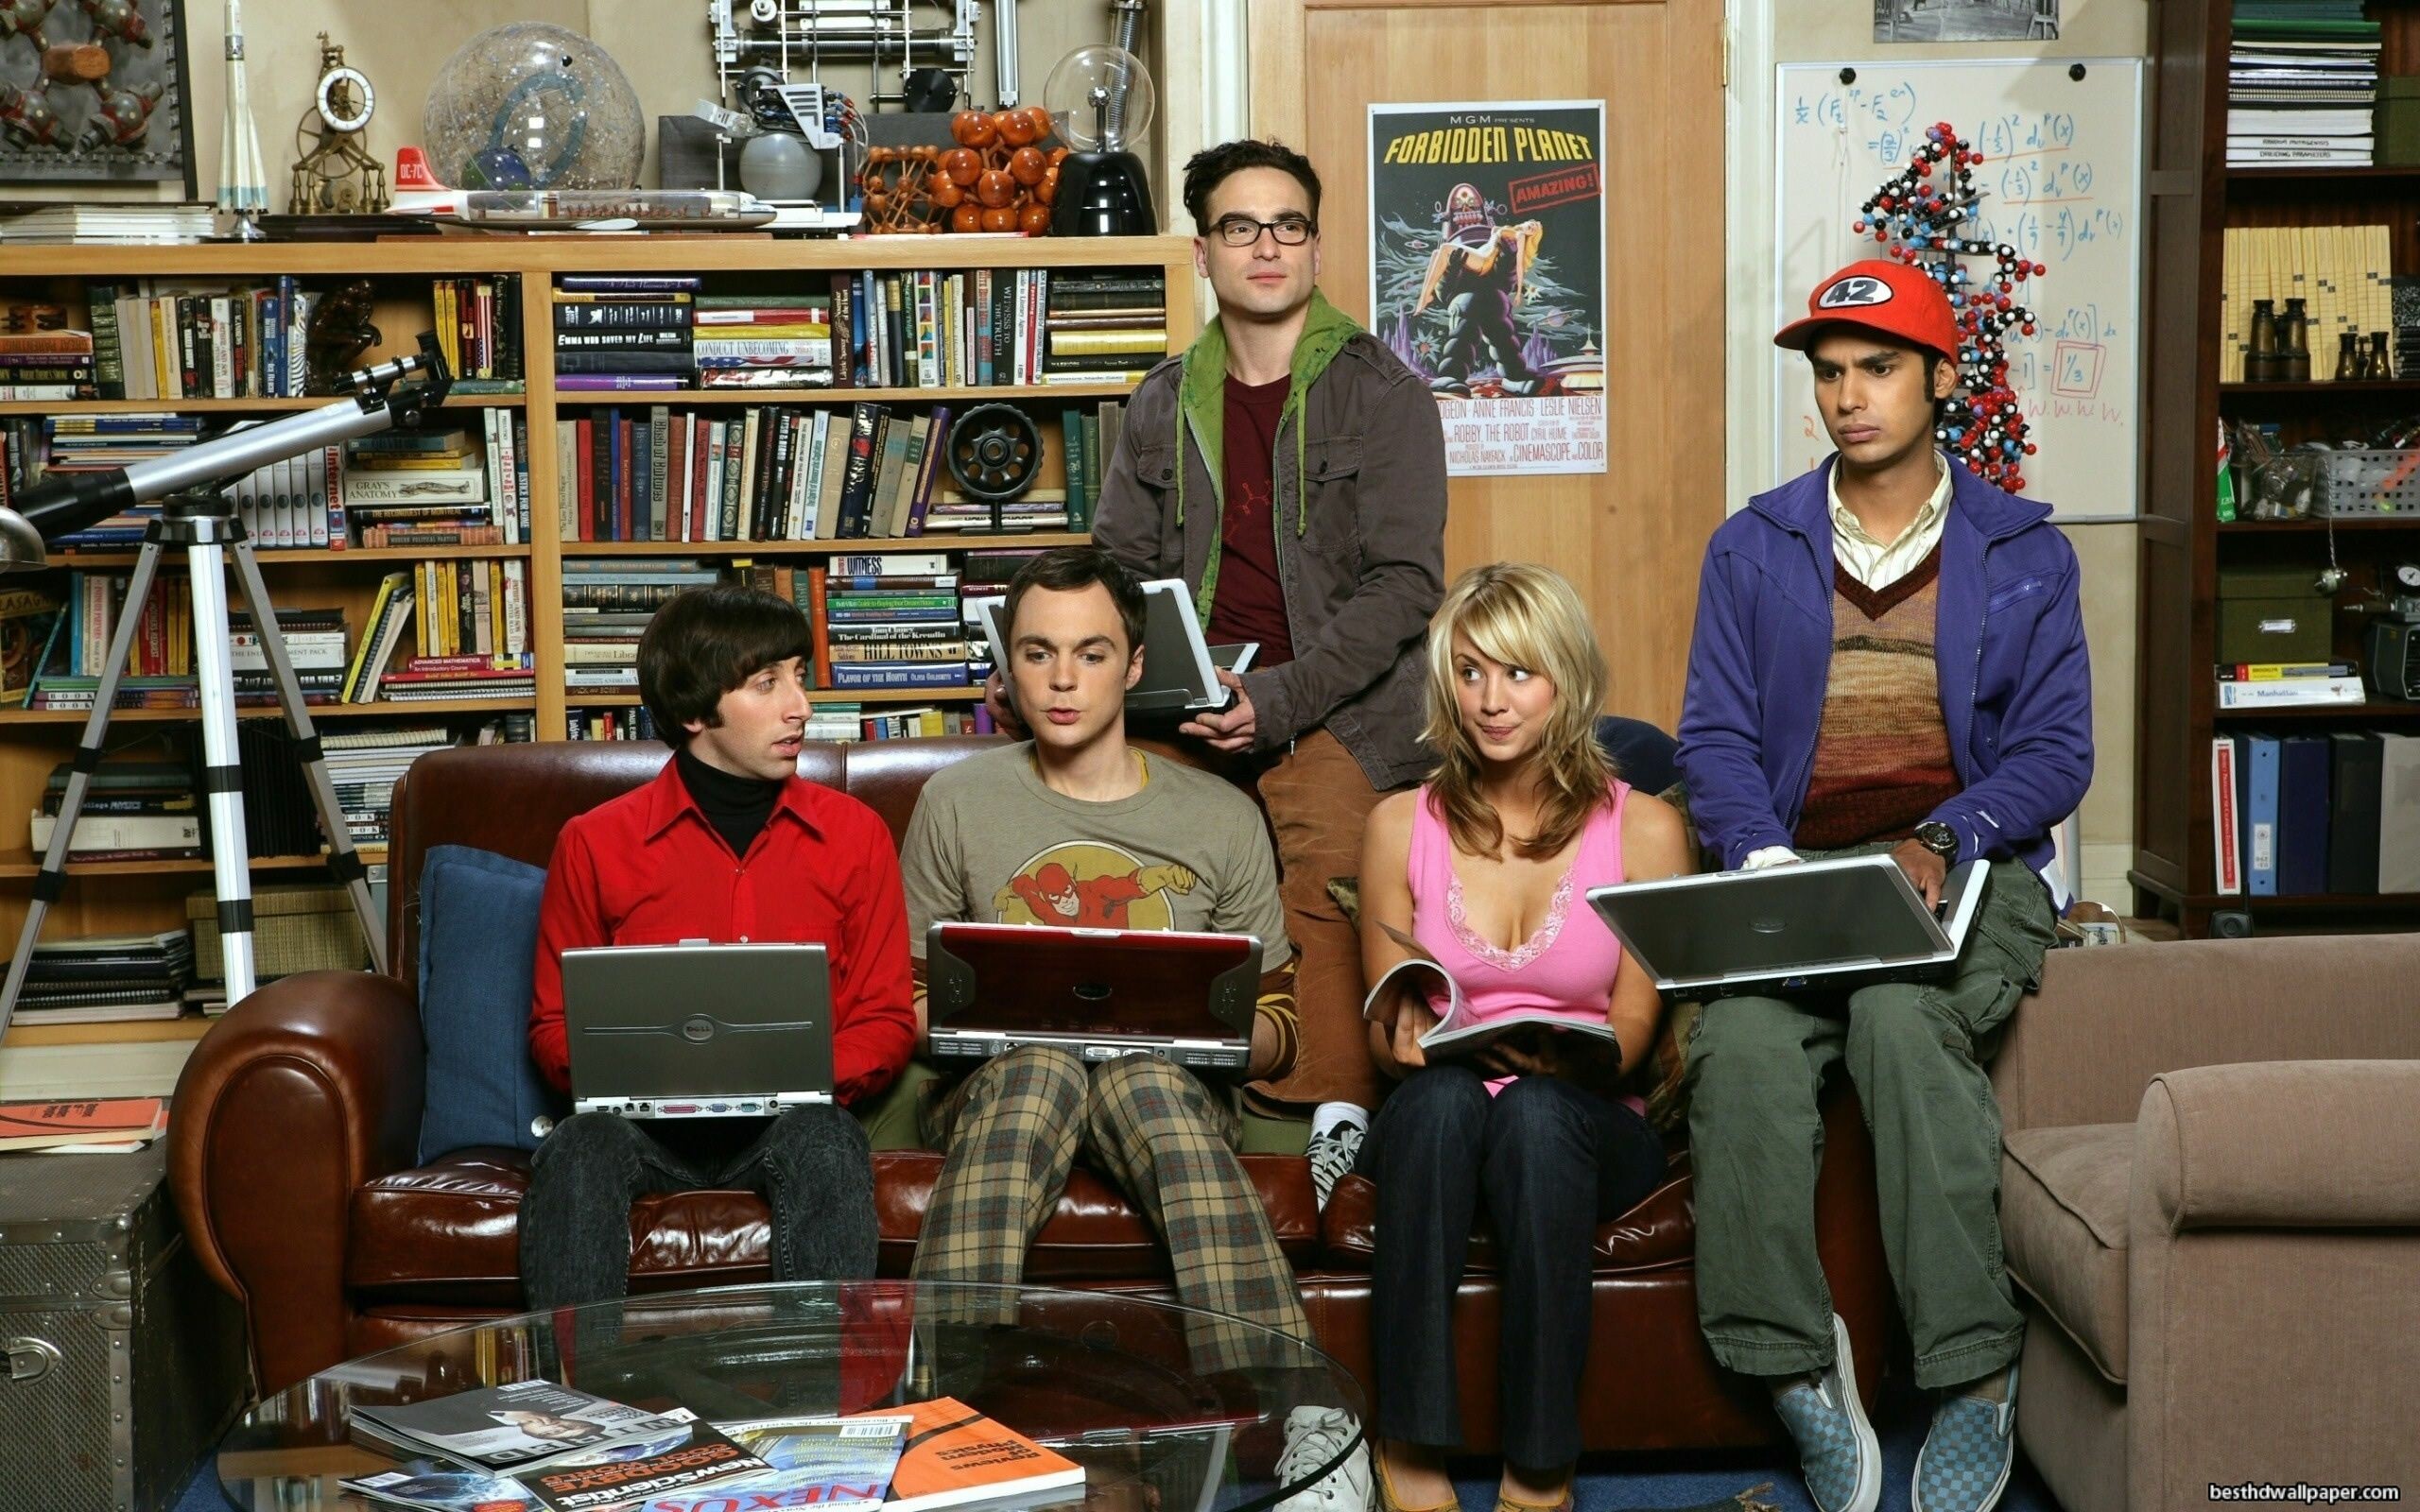 The Big Bang Theory: The four main male characters are employed at Caltech and have science-related occupations. 2560x1600 HD Background.